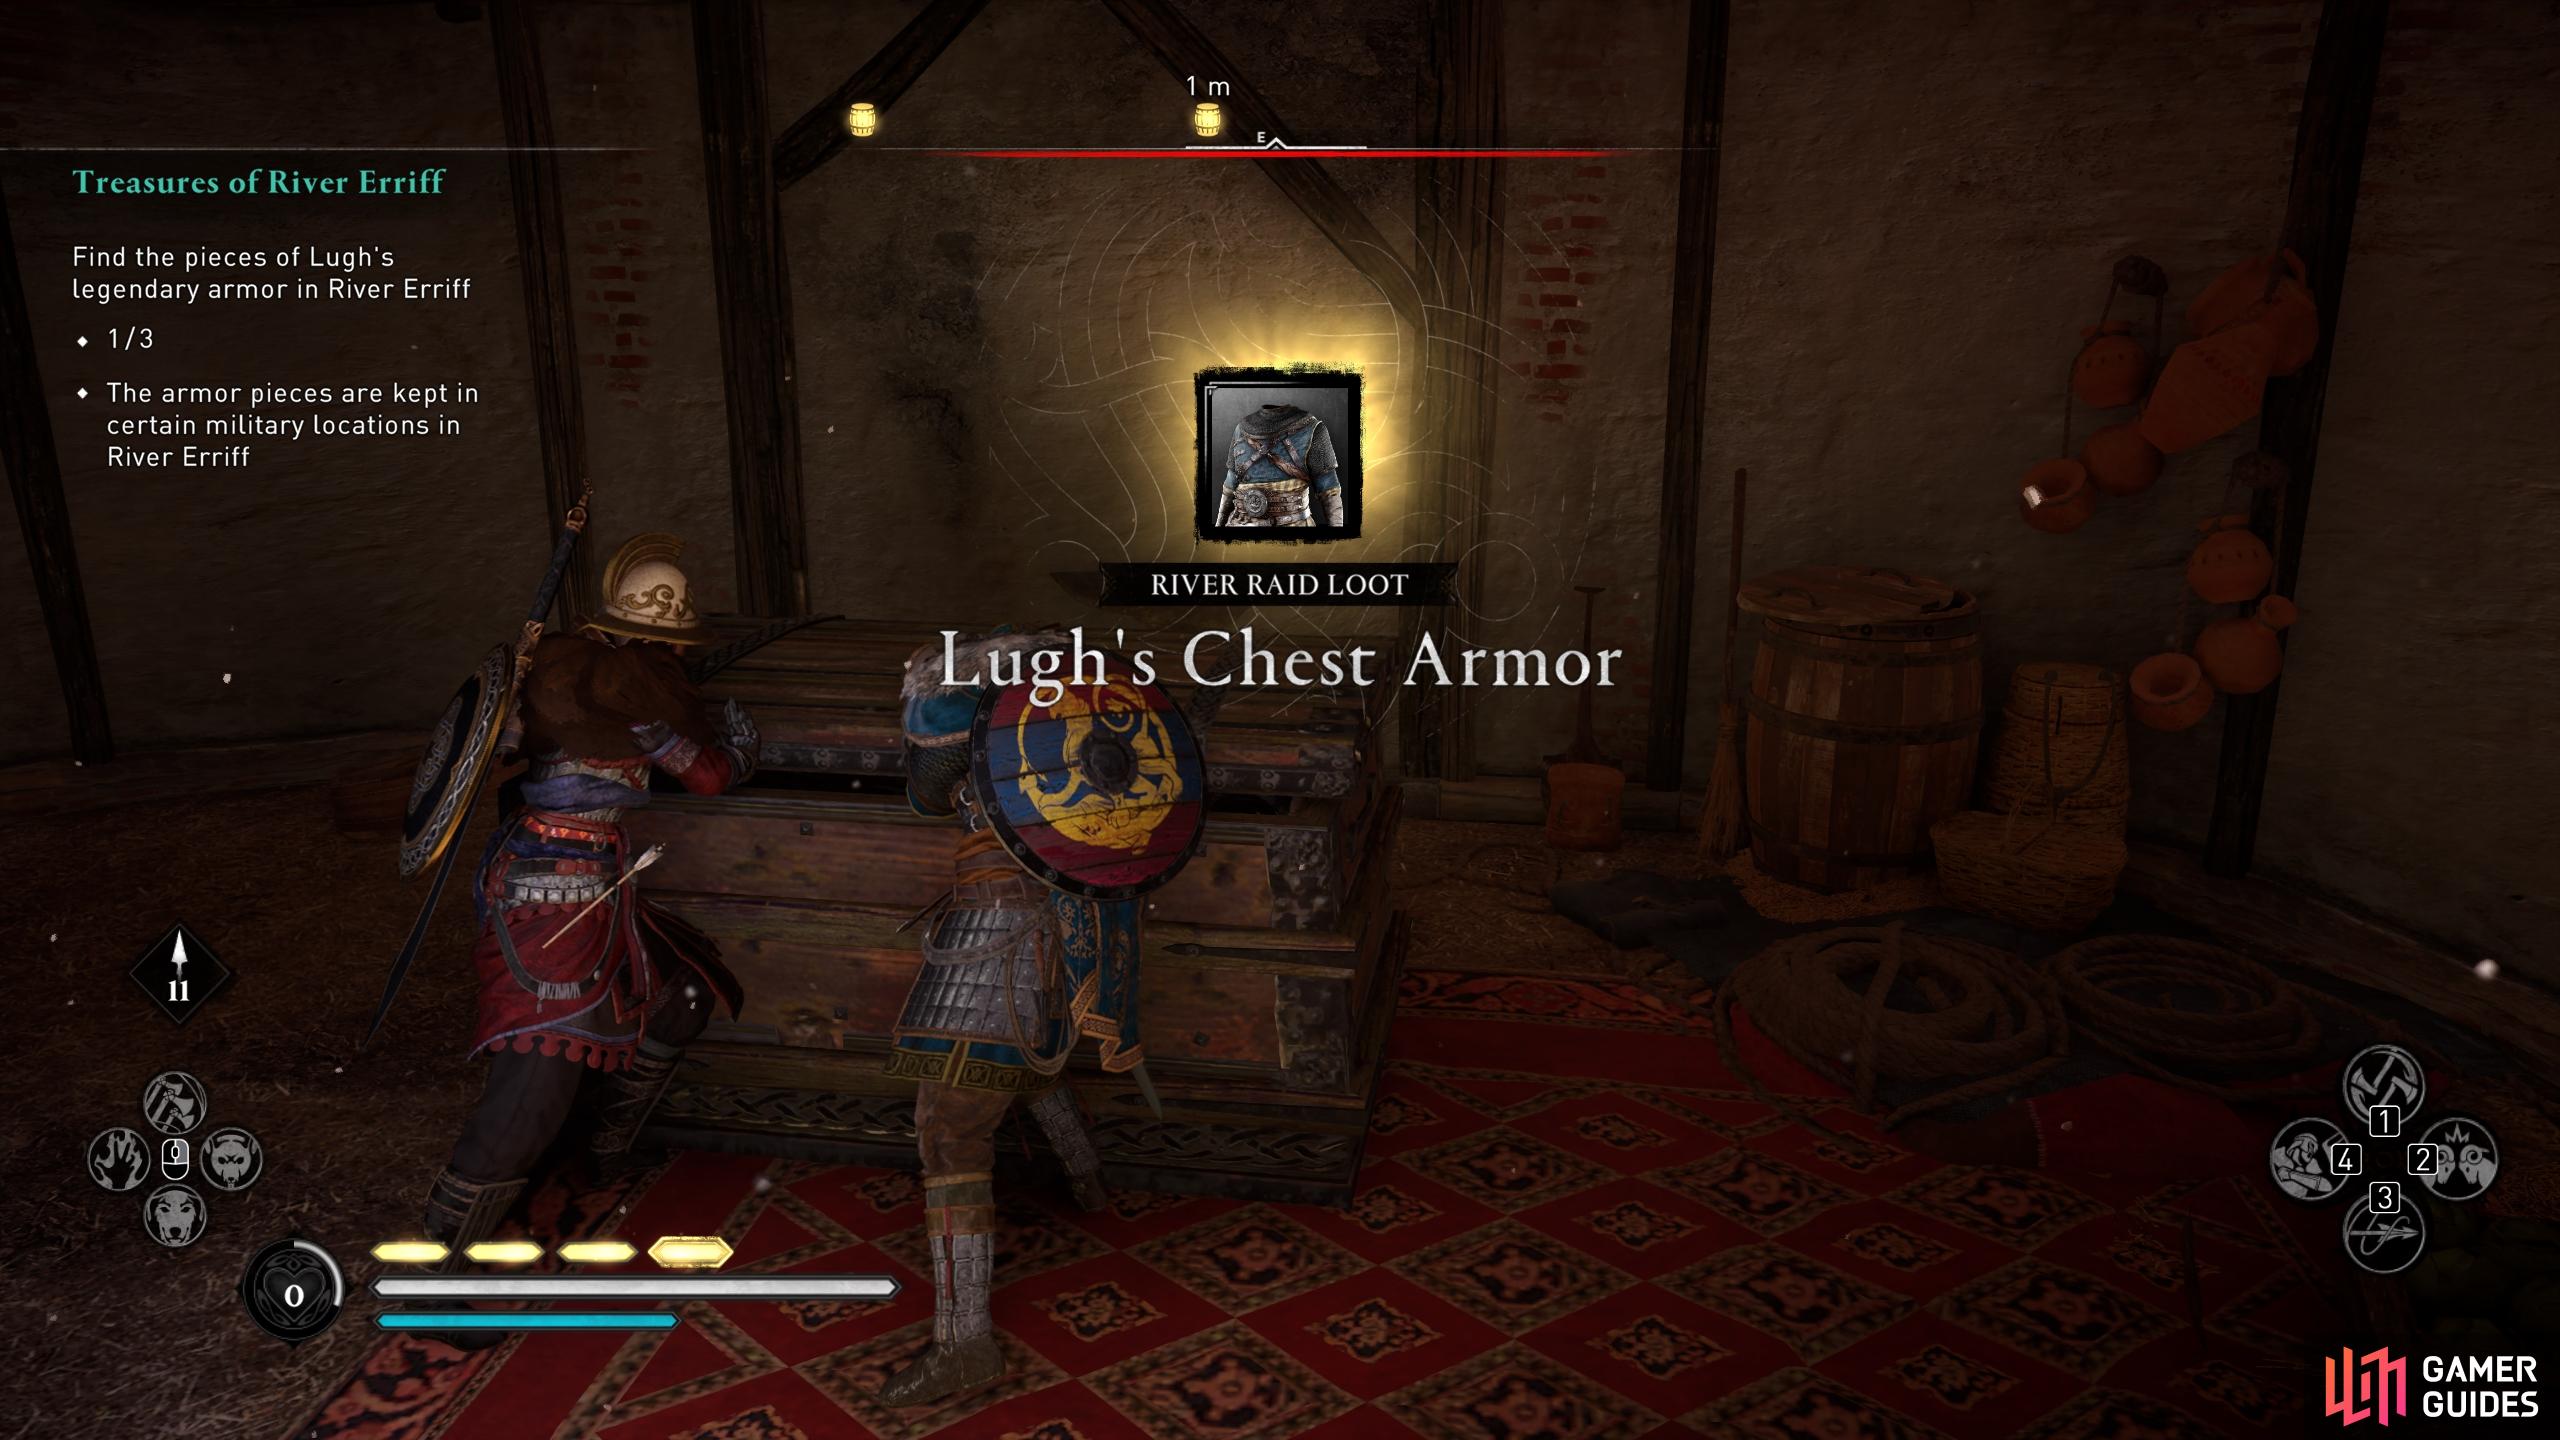 You'll find the Lugh's Chest Armor in a regular wealth chest.